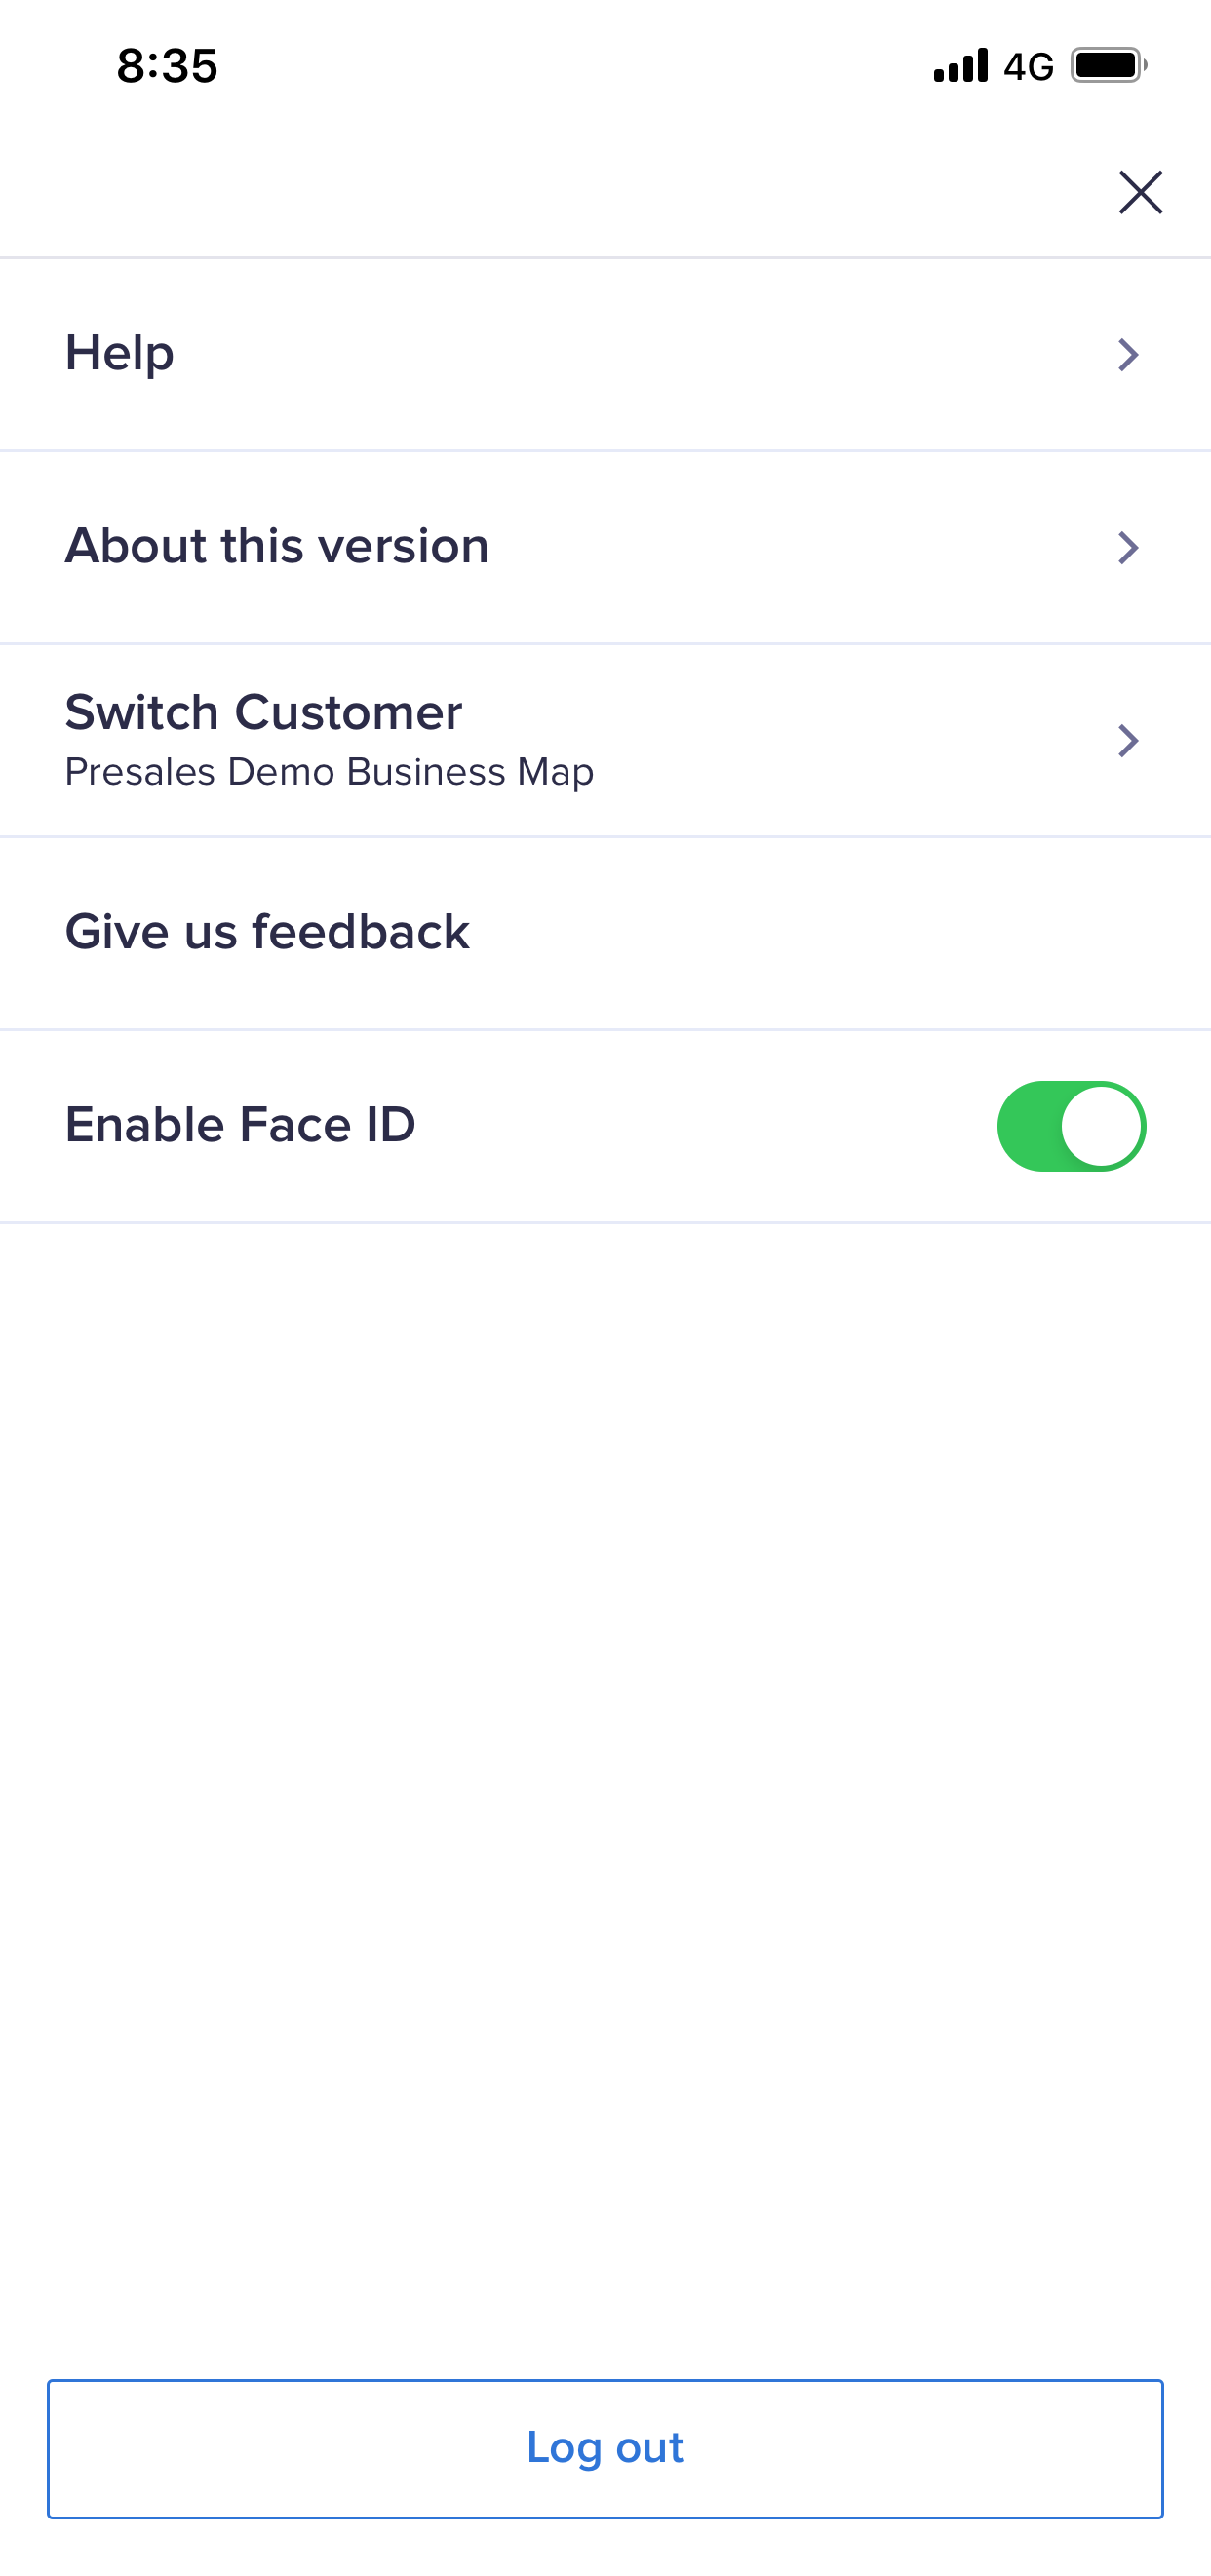 Mobile menu screen with the Enable Face ID option toggled right. This means Face ID is enabled.